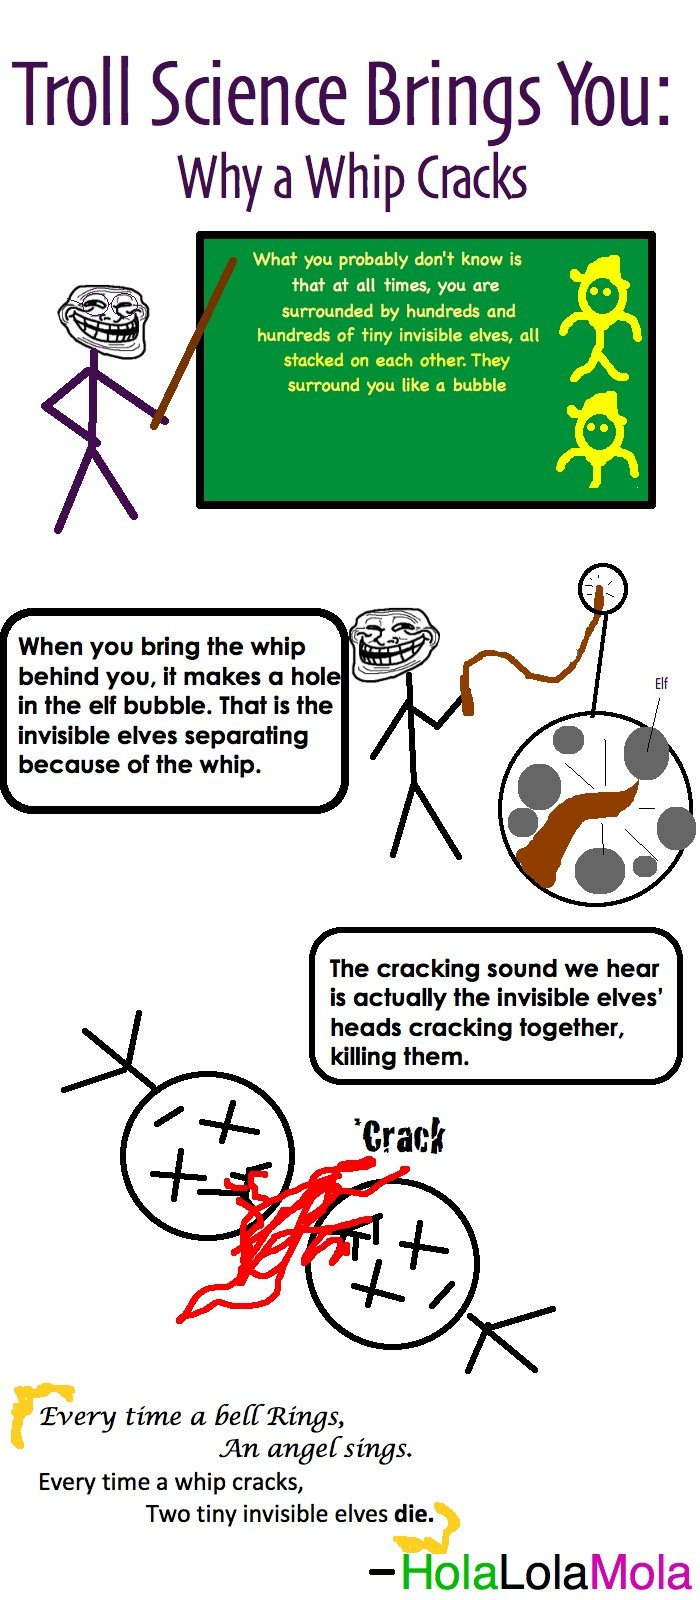 Troll Science. OC by me&lt;br /&gt; I don't know if I should do more..... Troll Science Brings You: Why a Whip Cracks MMI we ' den? knew is that at all times. w